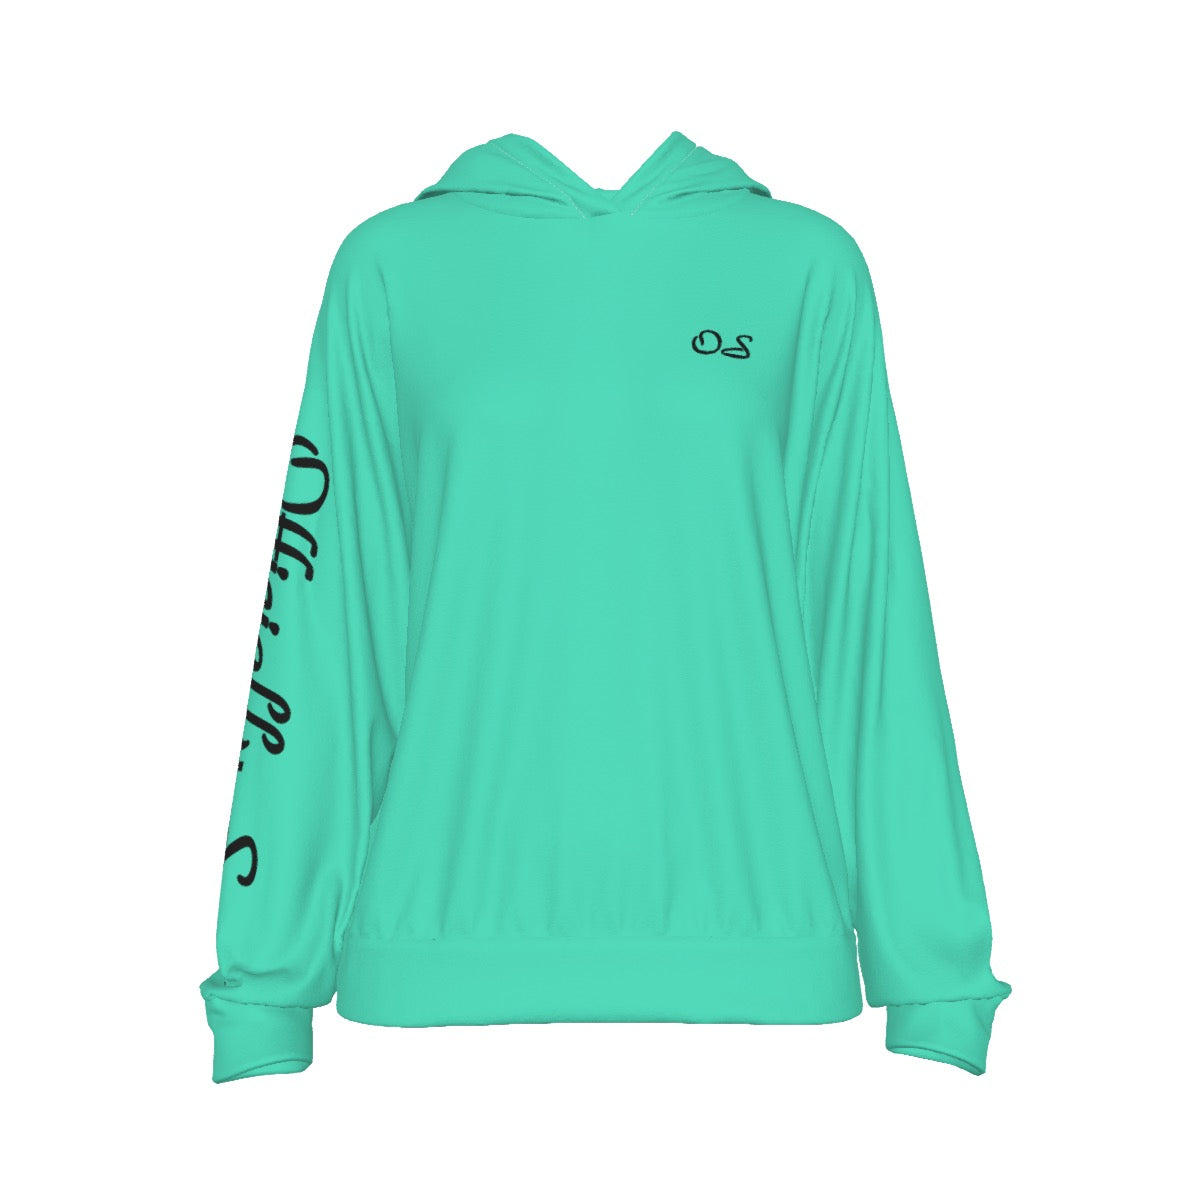 Officially Sexy Turquoise Green Women's Casual Hoodie With Black Logos